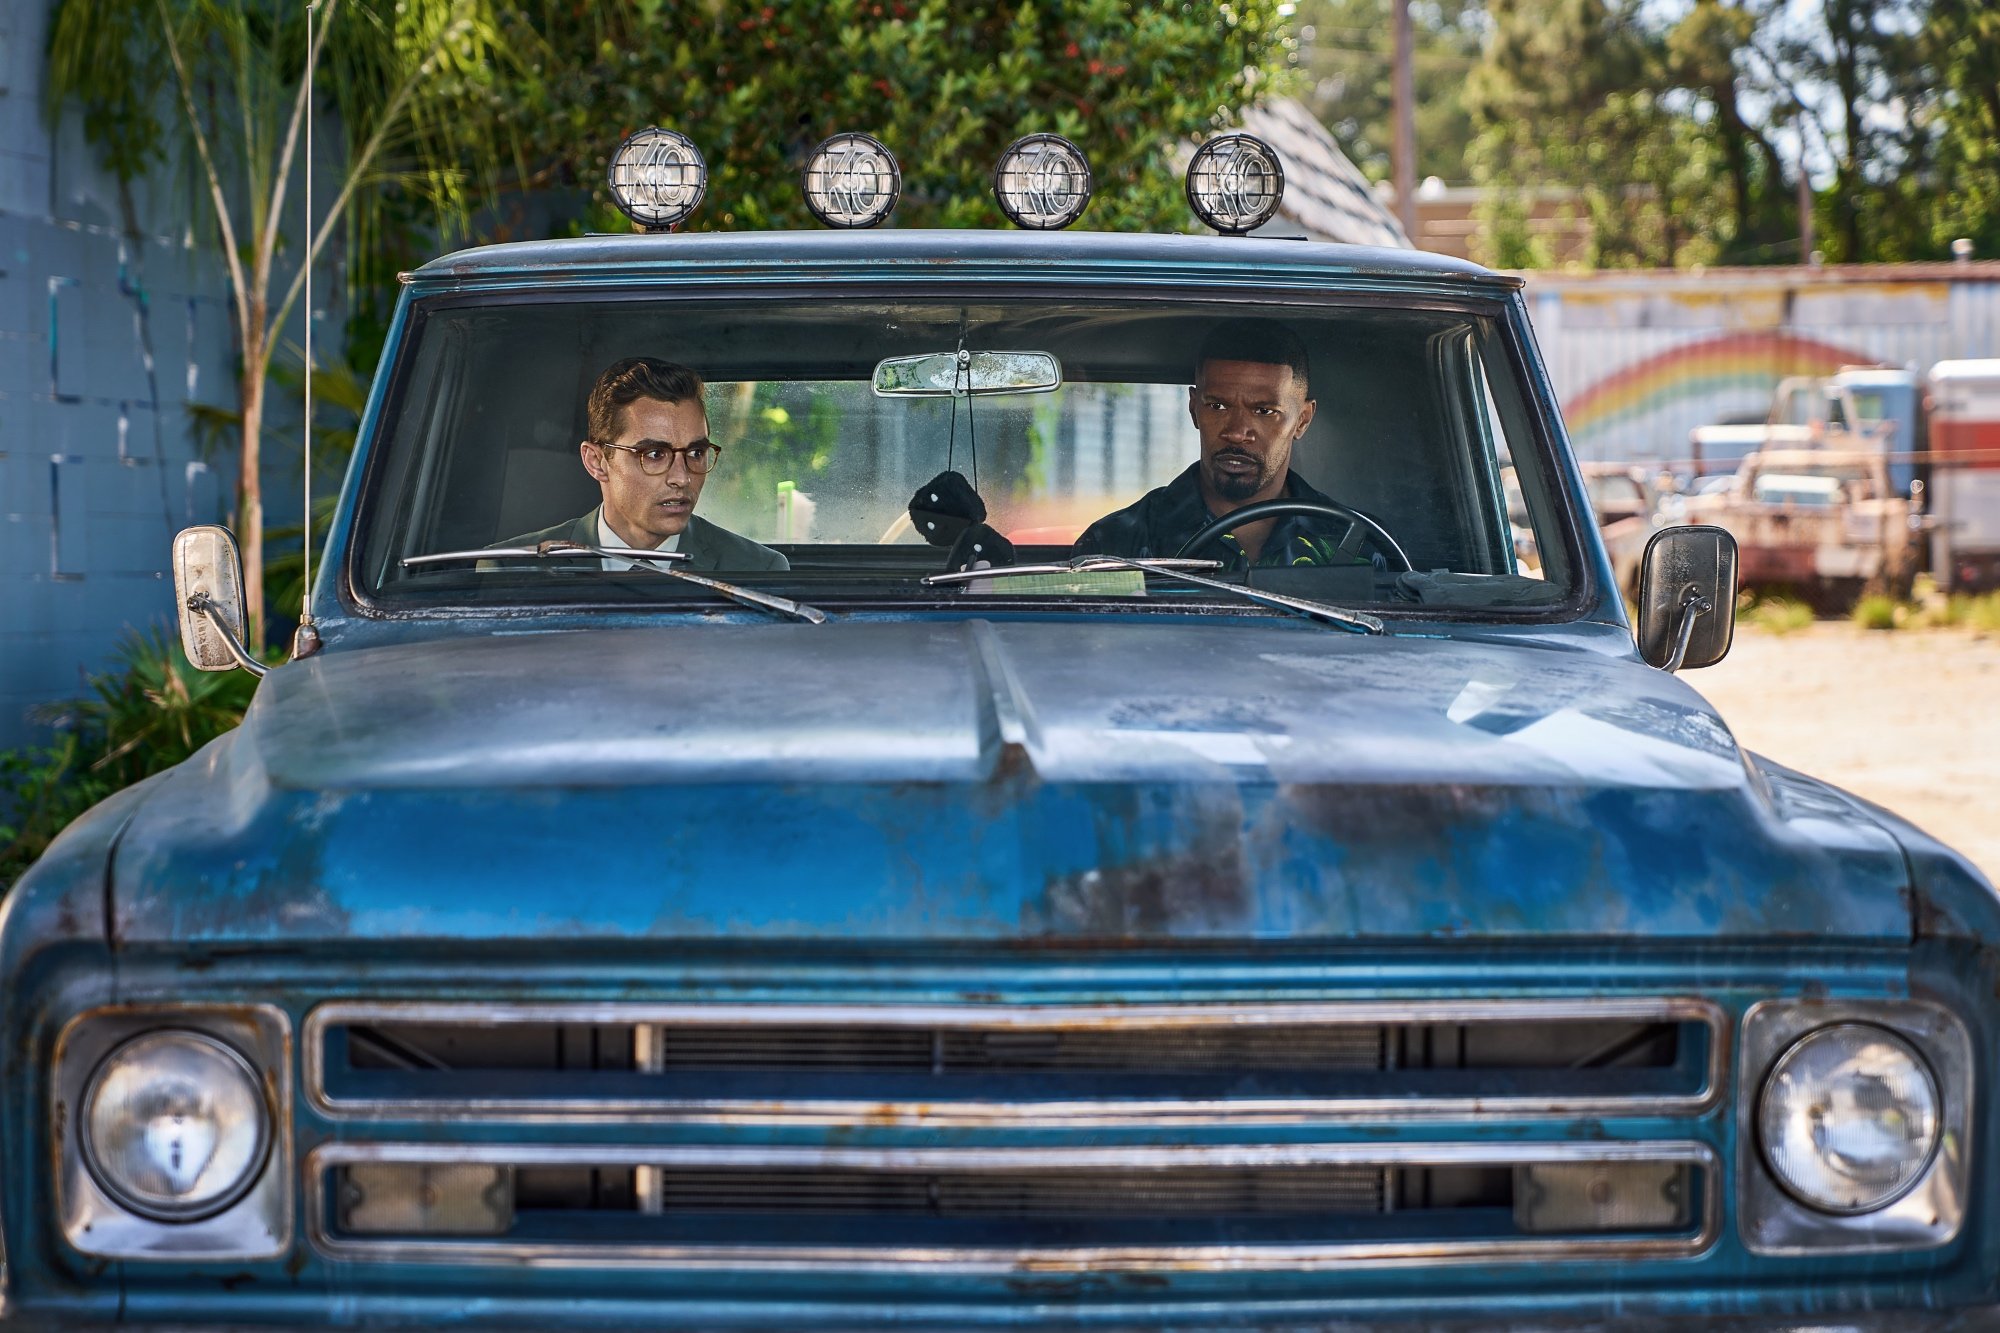 'Day Shift' Dave Franco as Seth and Jamie Foxx as Bud Jablonski sitting in a blue truck looking shocked